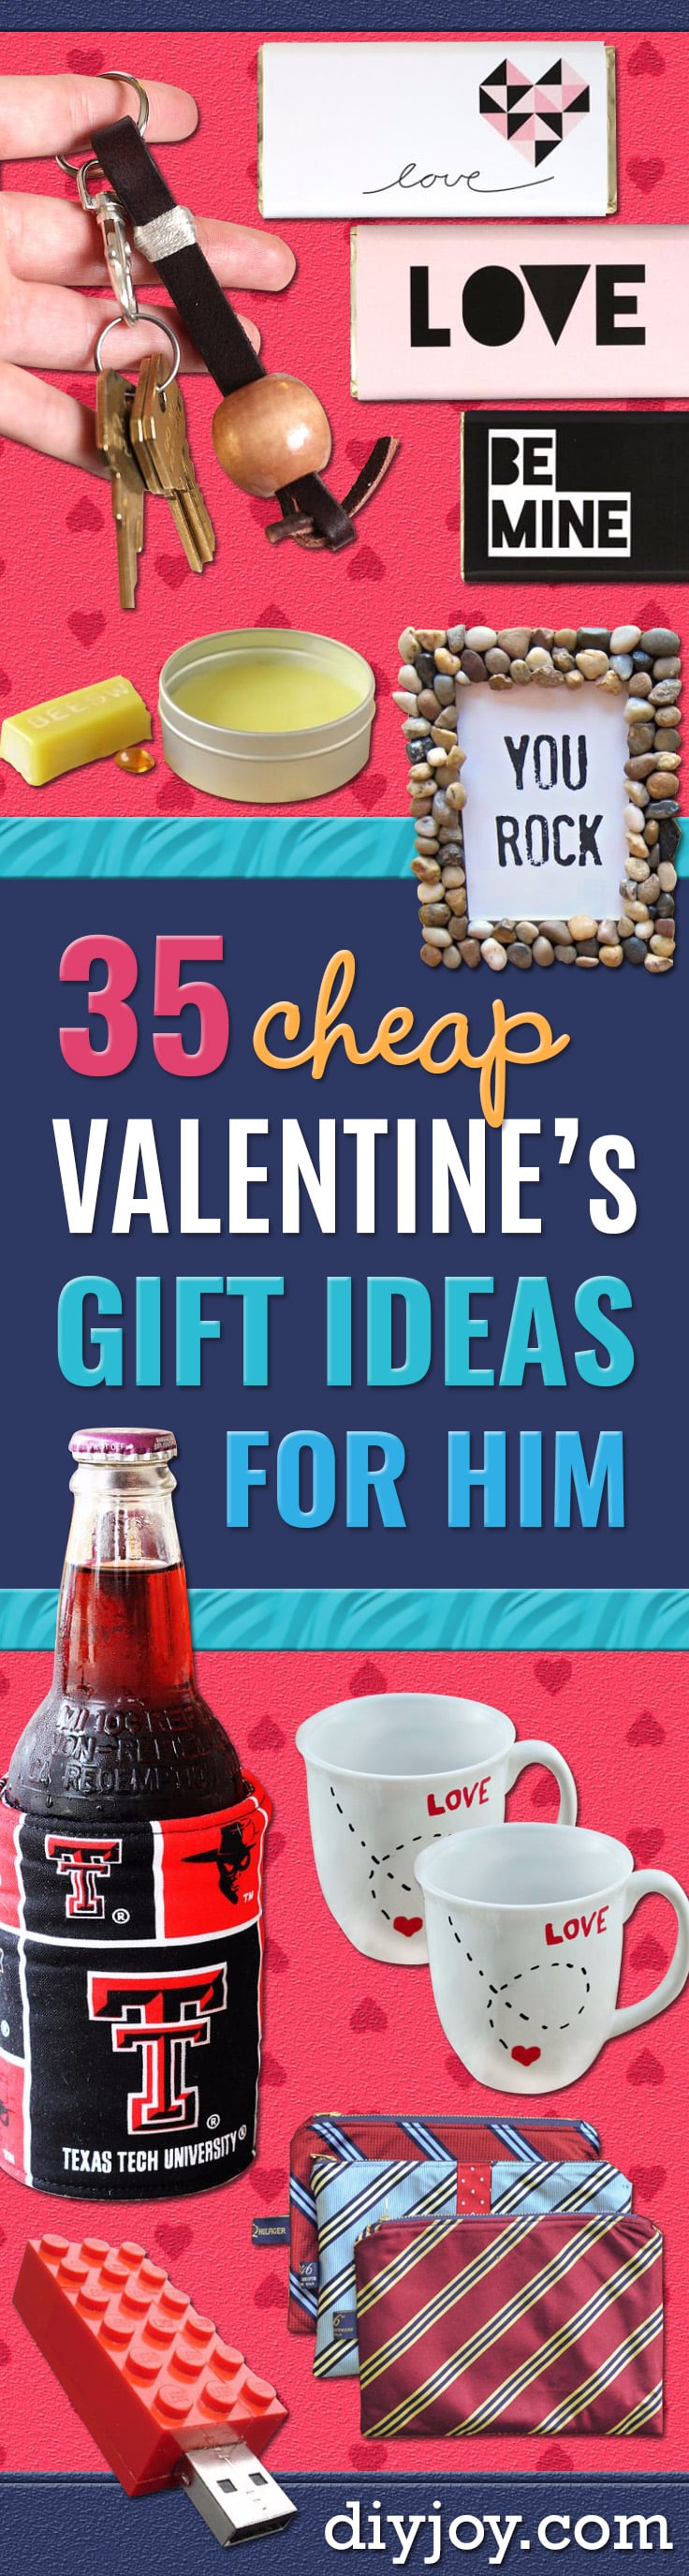 Easy DIY Valentines Day Gifts for Him - Valentine's Day Chocolate Bar Wraps - Cool and Easy Things To Make for Your Husband, Boyfriend, Fiancee - Creative and Cheap Do It Yourself Projects to Give Men, Guys